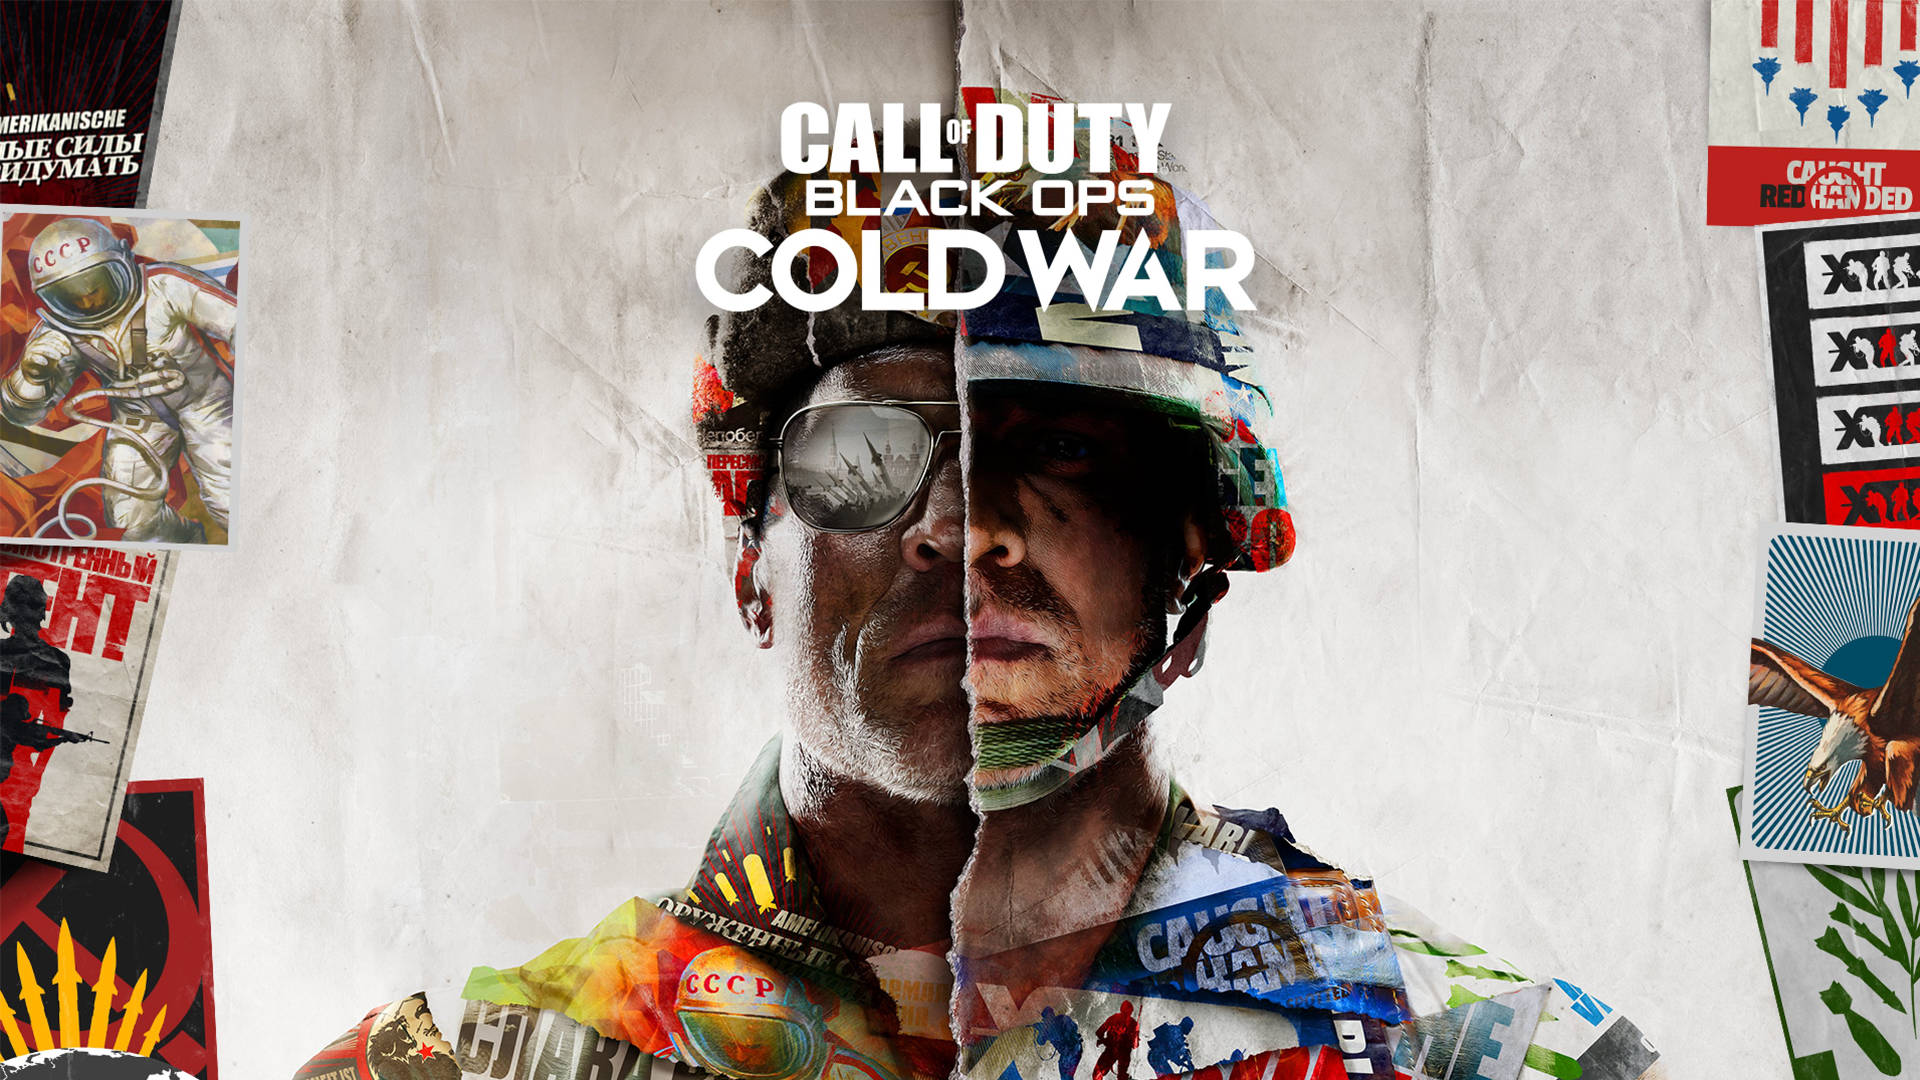 Free Call Of Duty Black Ops Cold War Wallpaper Downloads, [100+] Call Of Duty  Black Ops Cold War Wallpapers for FREE 